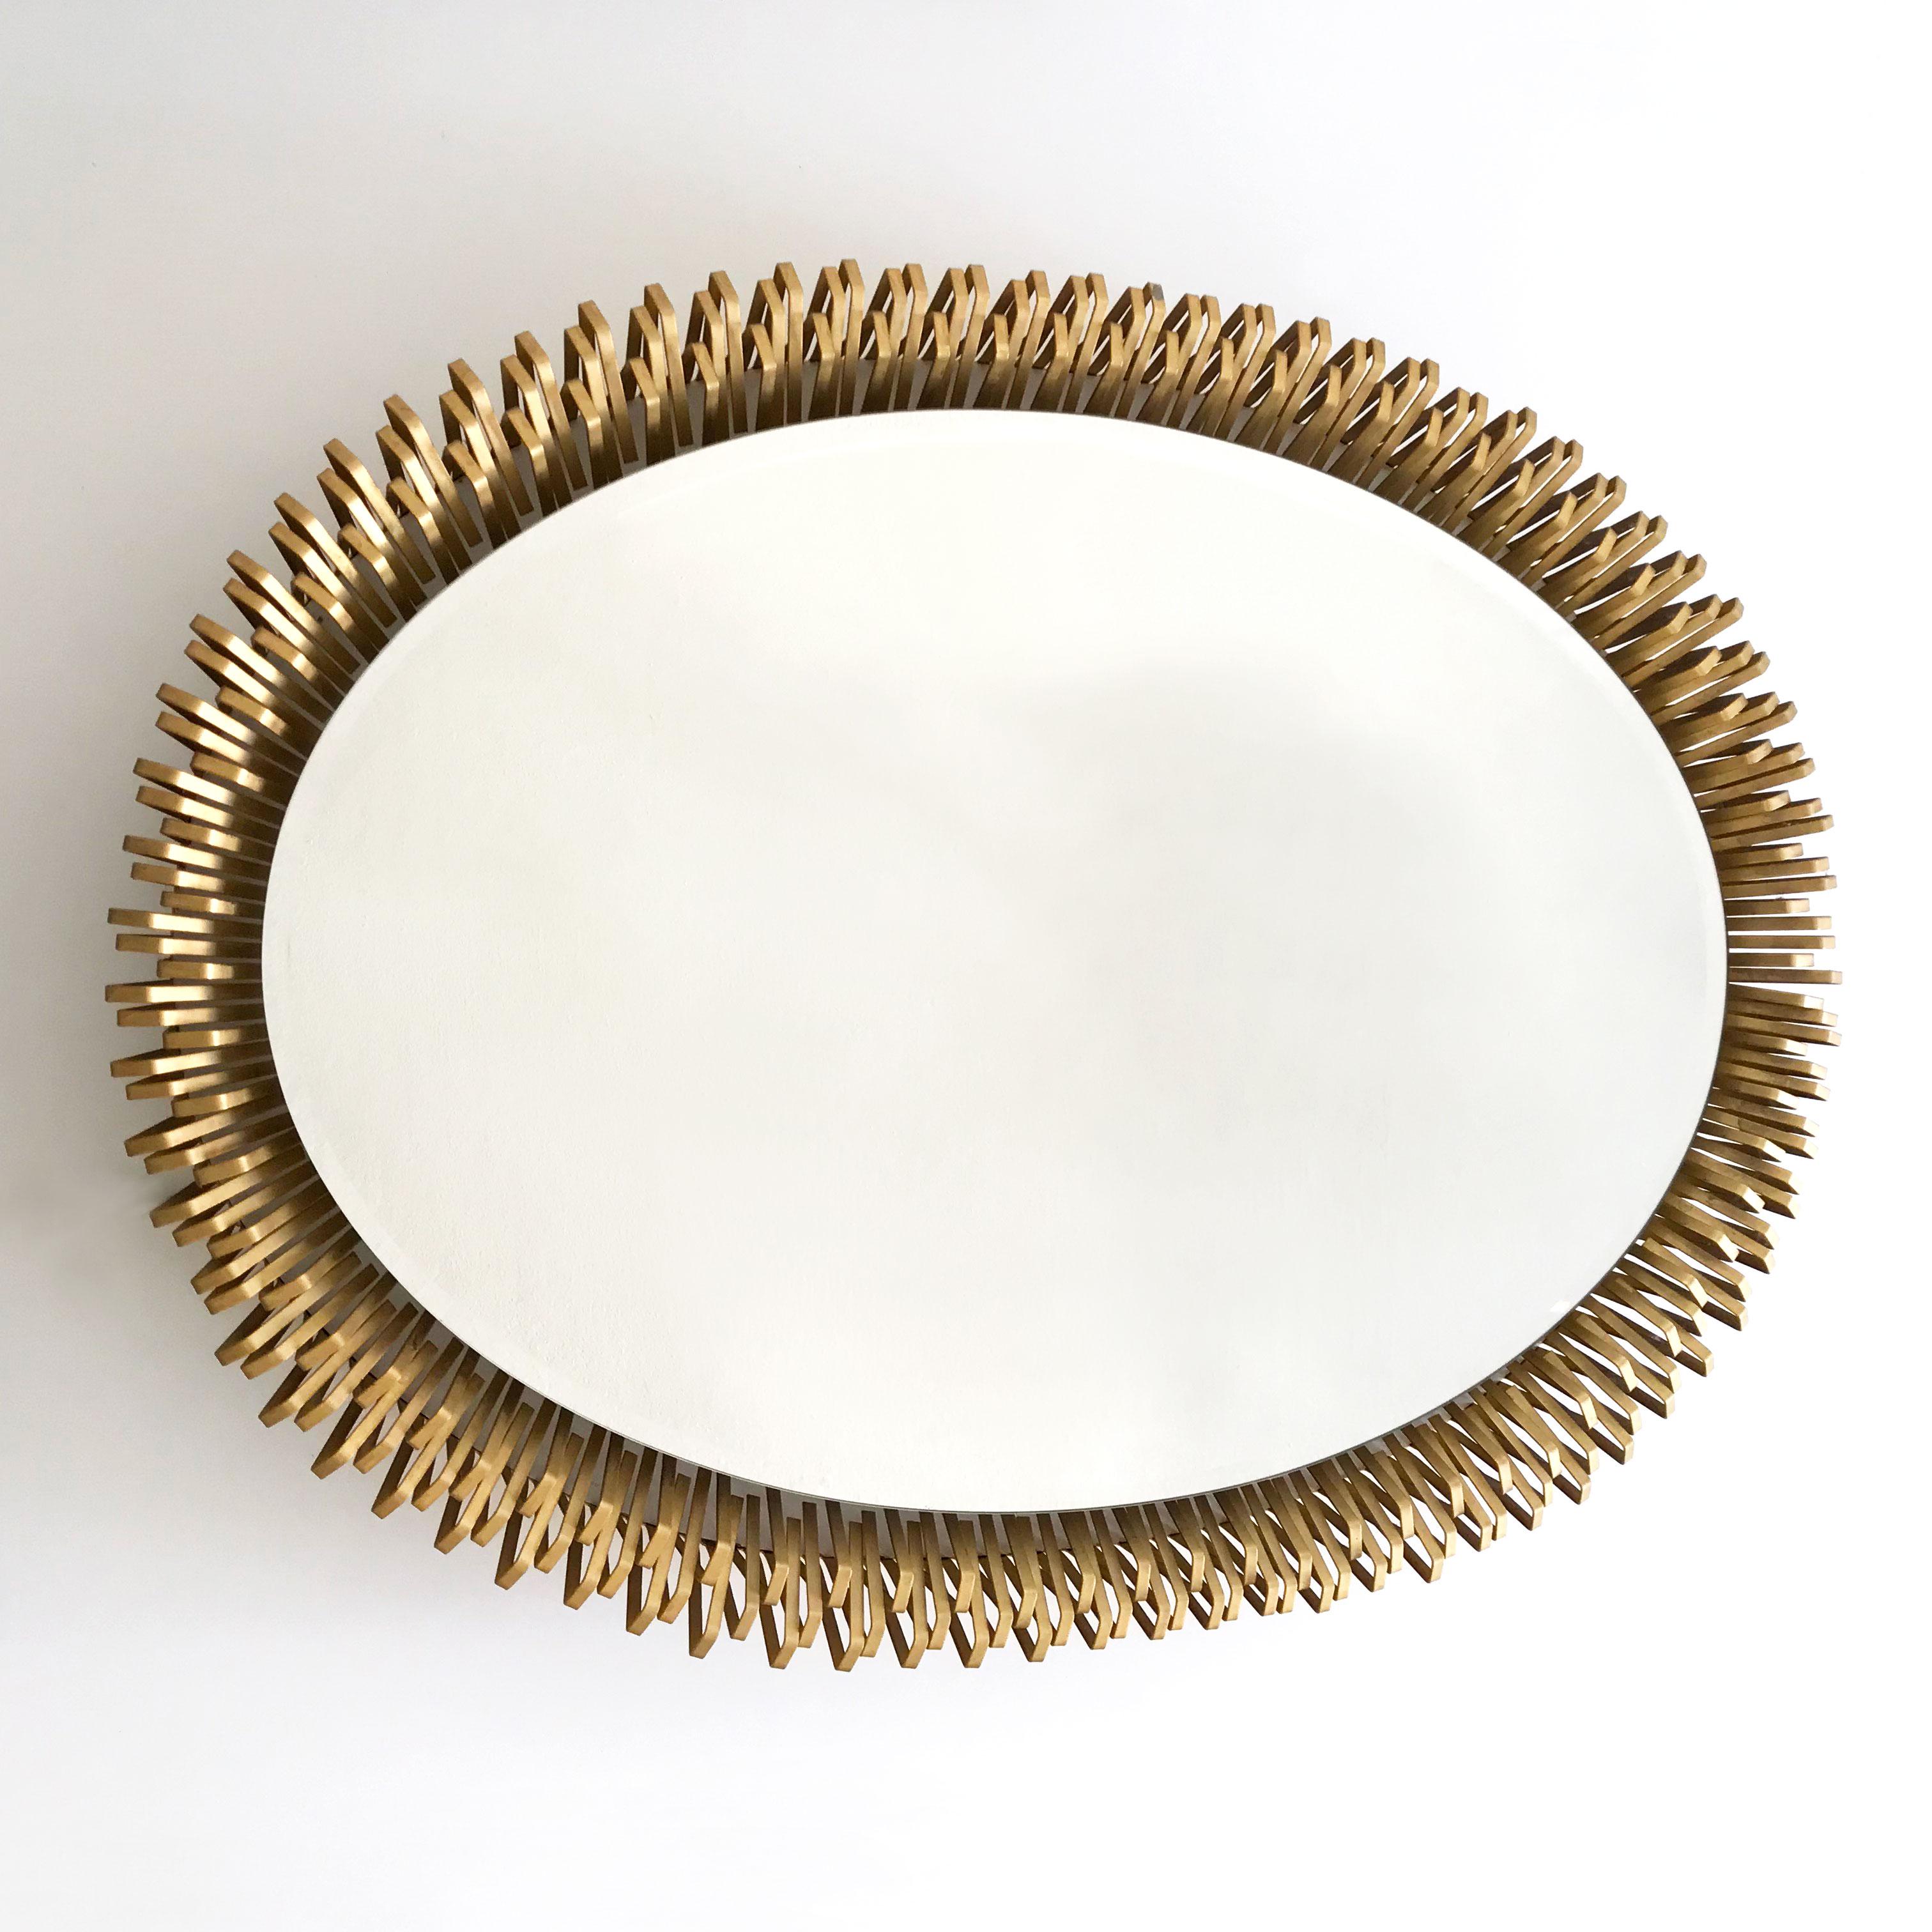 Anodized Exceptional Mid-Century Modern Backlit Wall Mirror by Schöninger, 1950s, Germany